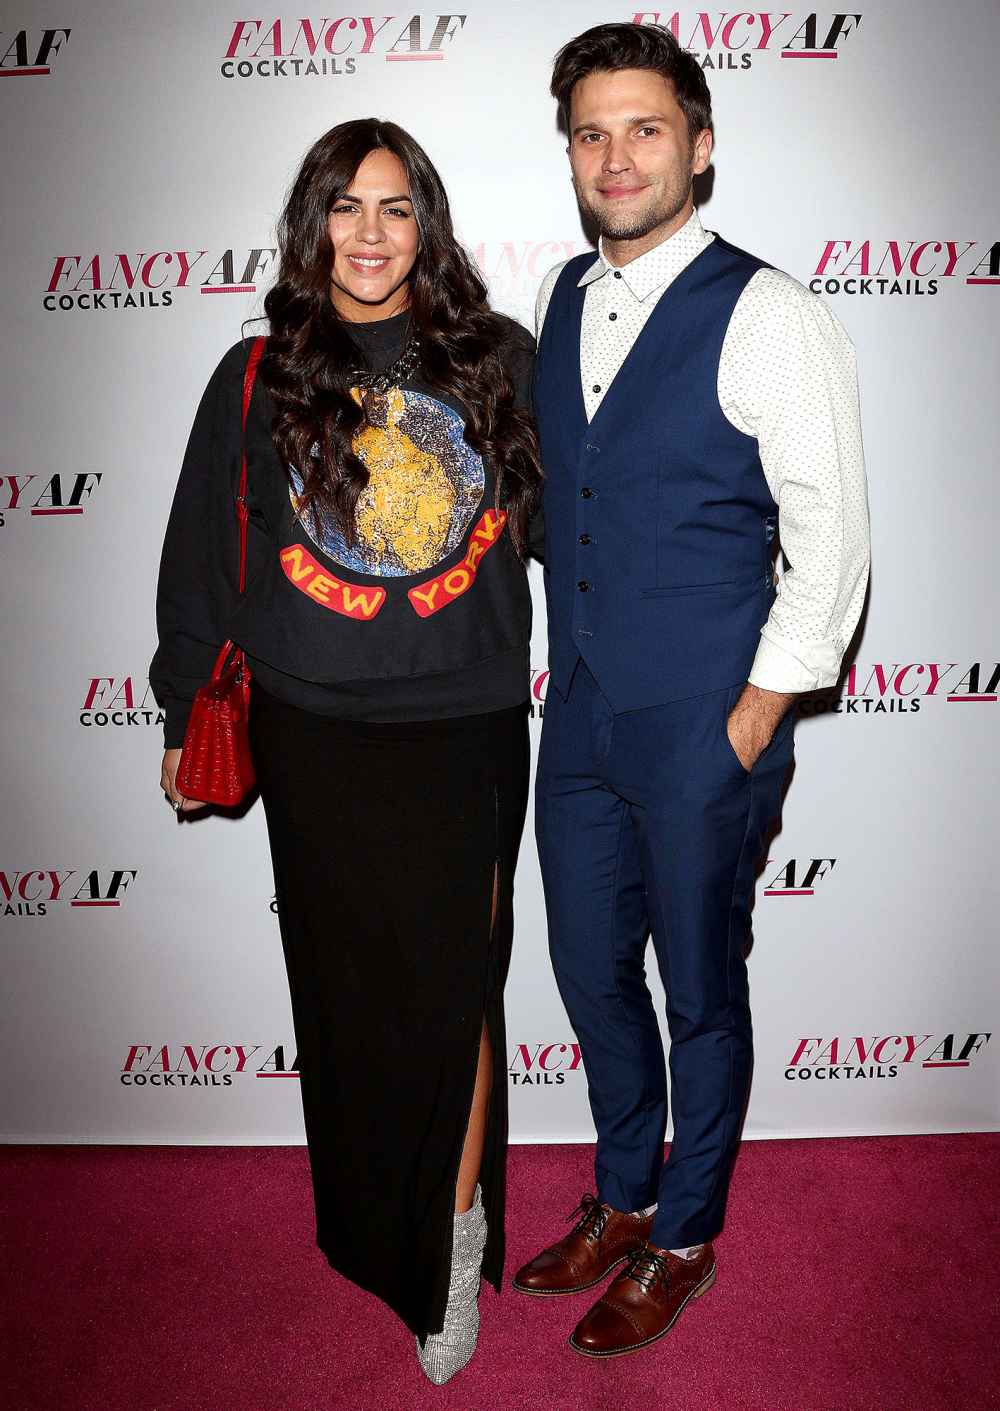 Tom Schwartz Said It Wasn't 'Too Late' to Start a Family With Katie Maloney 1 Month Ahead of Split 01